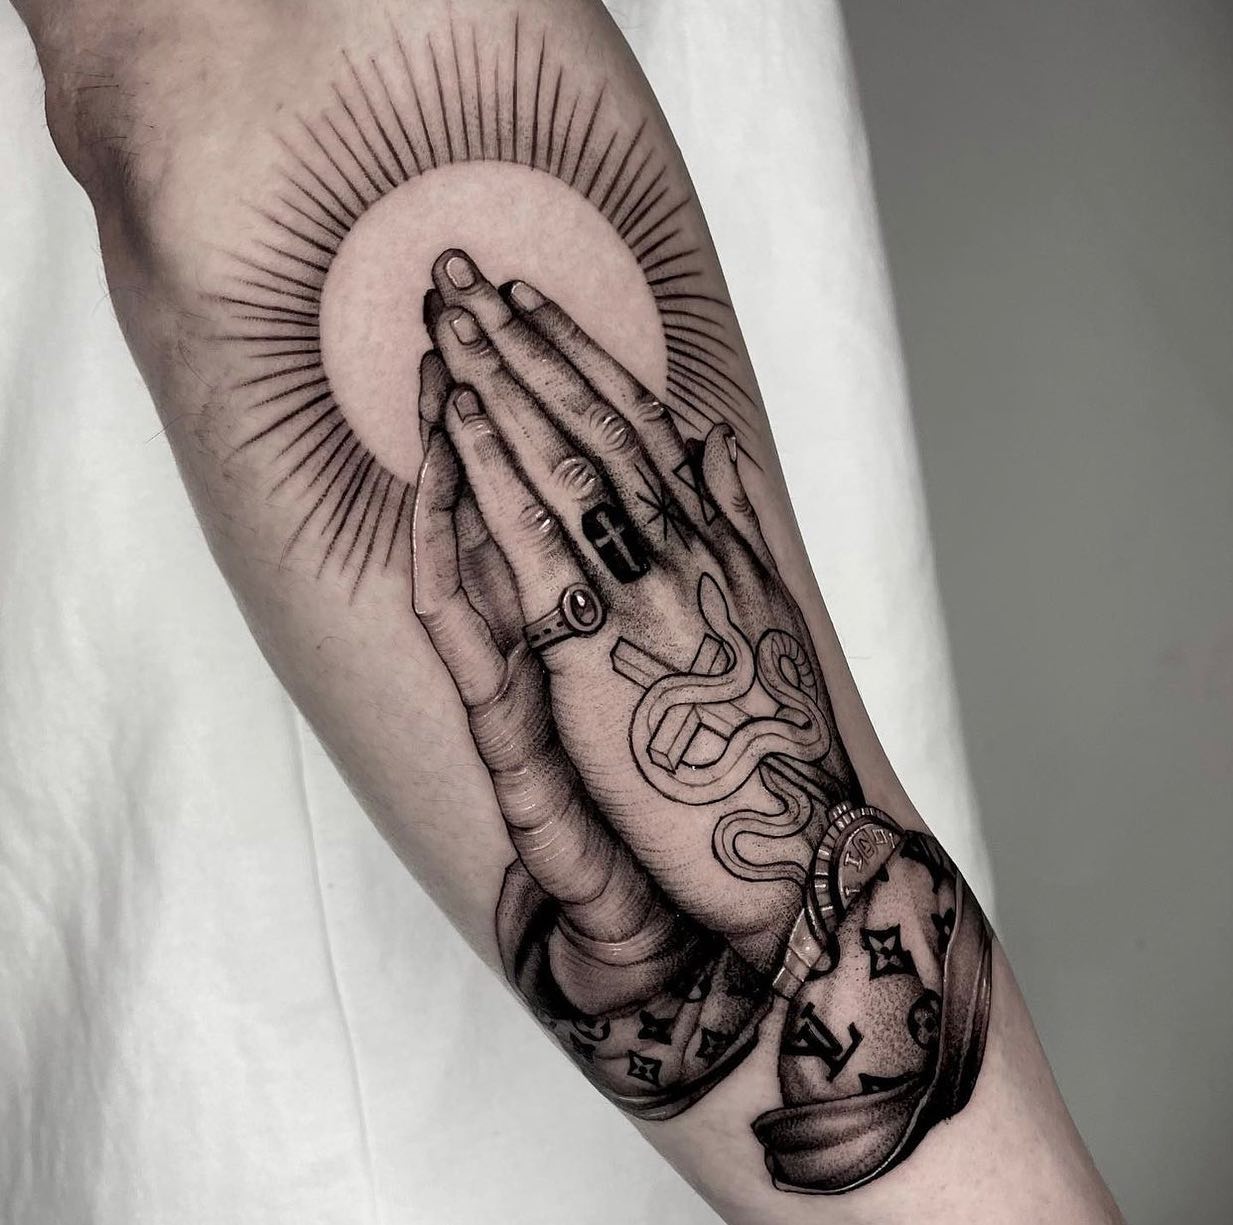 Find a competent tattooist and get this tattoo if you want to get an elegant piece of art. All of these details in hands make them look super-real.